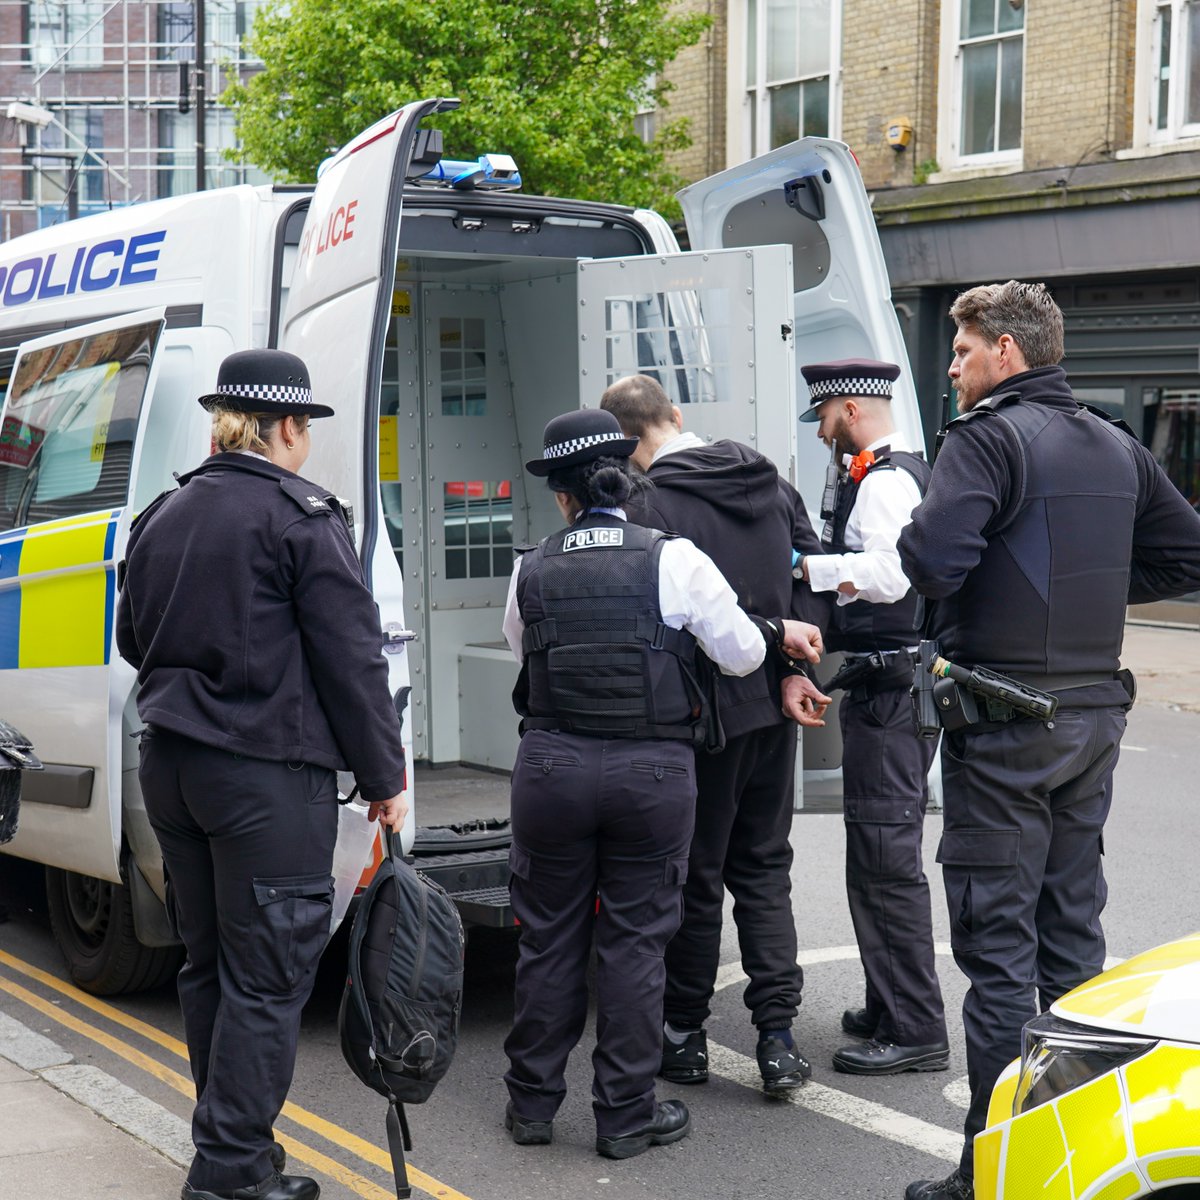 Eagle-eyed local officers in Wood Green spotted a robbery suspect when driving back to the police station after a call. They swiftly apprehended the man - he was arrested and taken in to custody. Proactive local policing in action #MyLocalMet